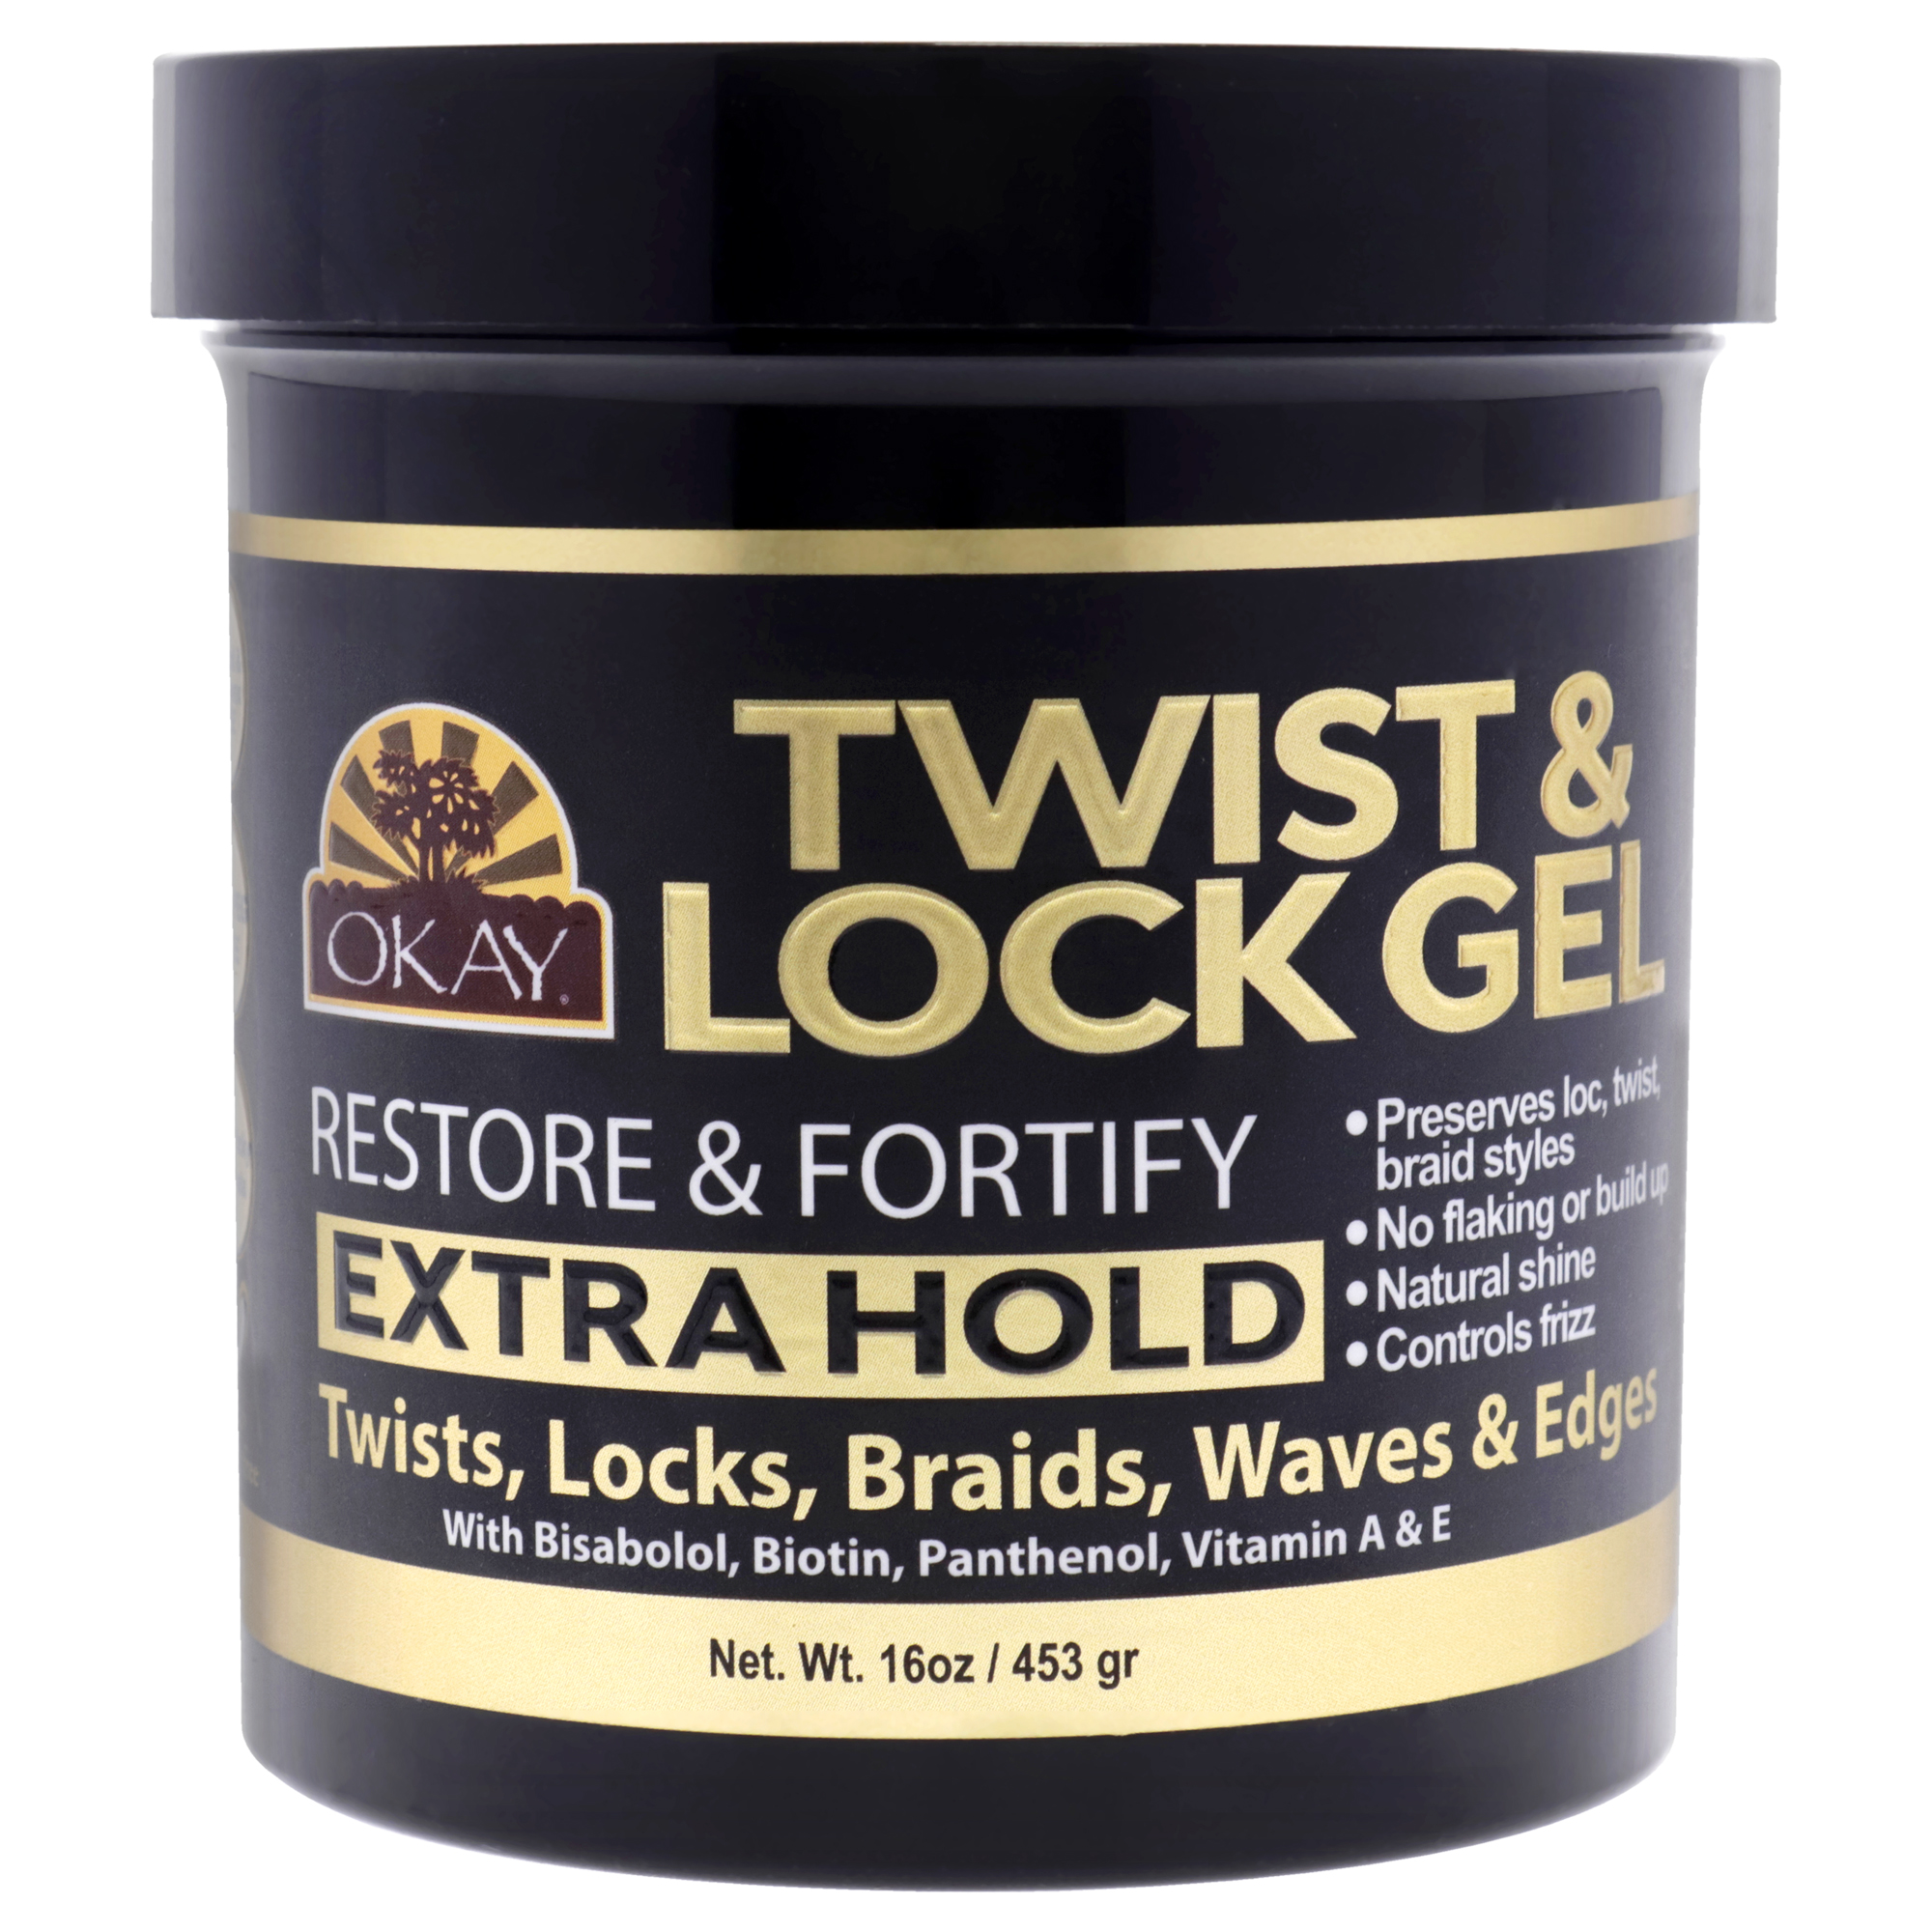 OKAY Twist and Lock Gel - Restore and Fortify-Extra Hold by Okay for Unisex - 16 oz Gel